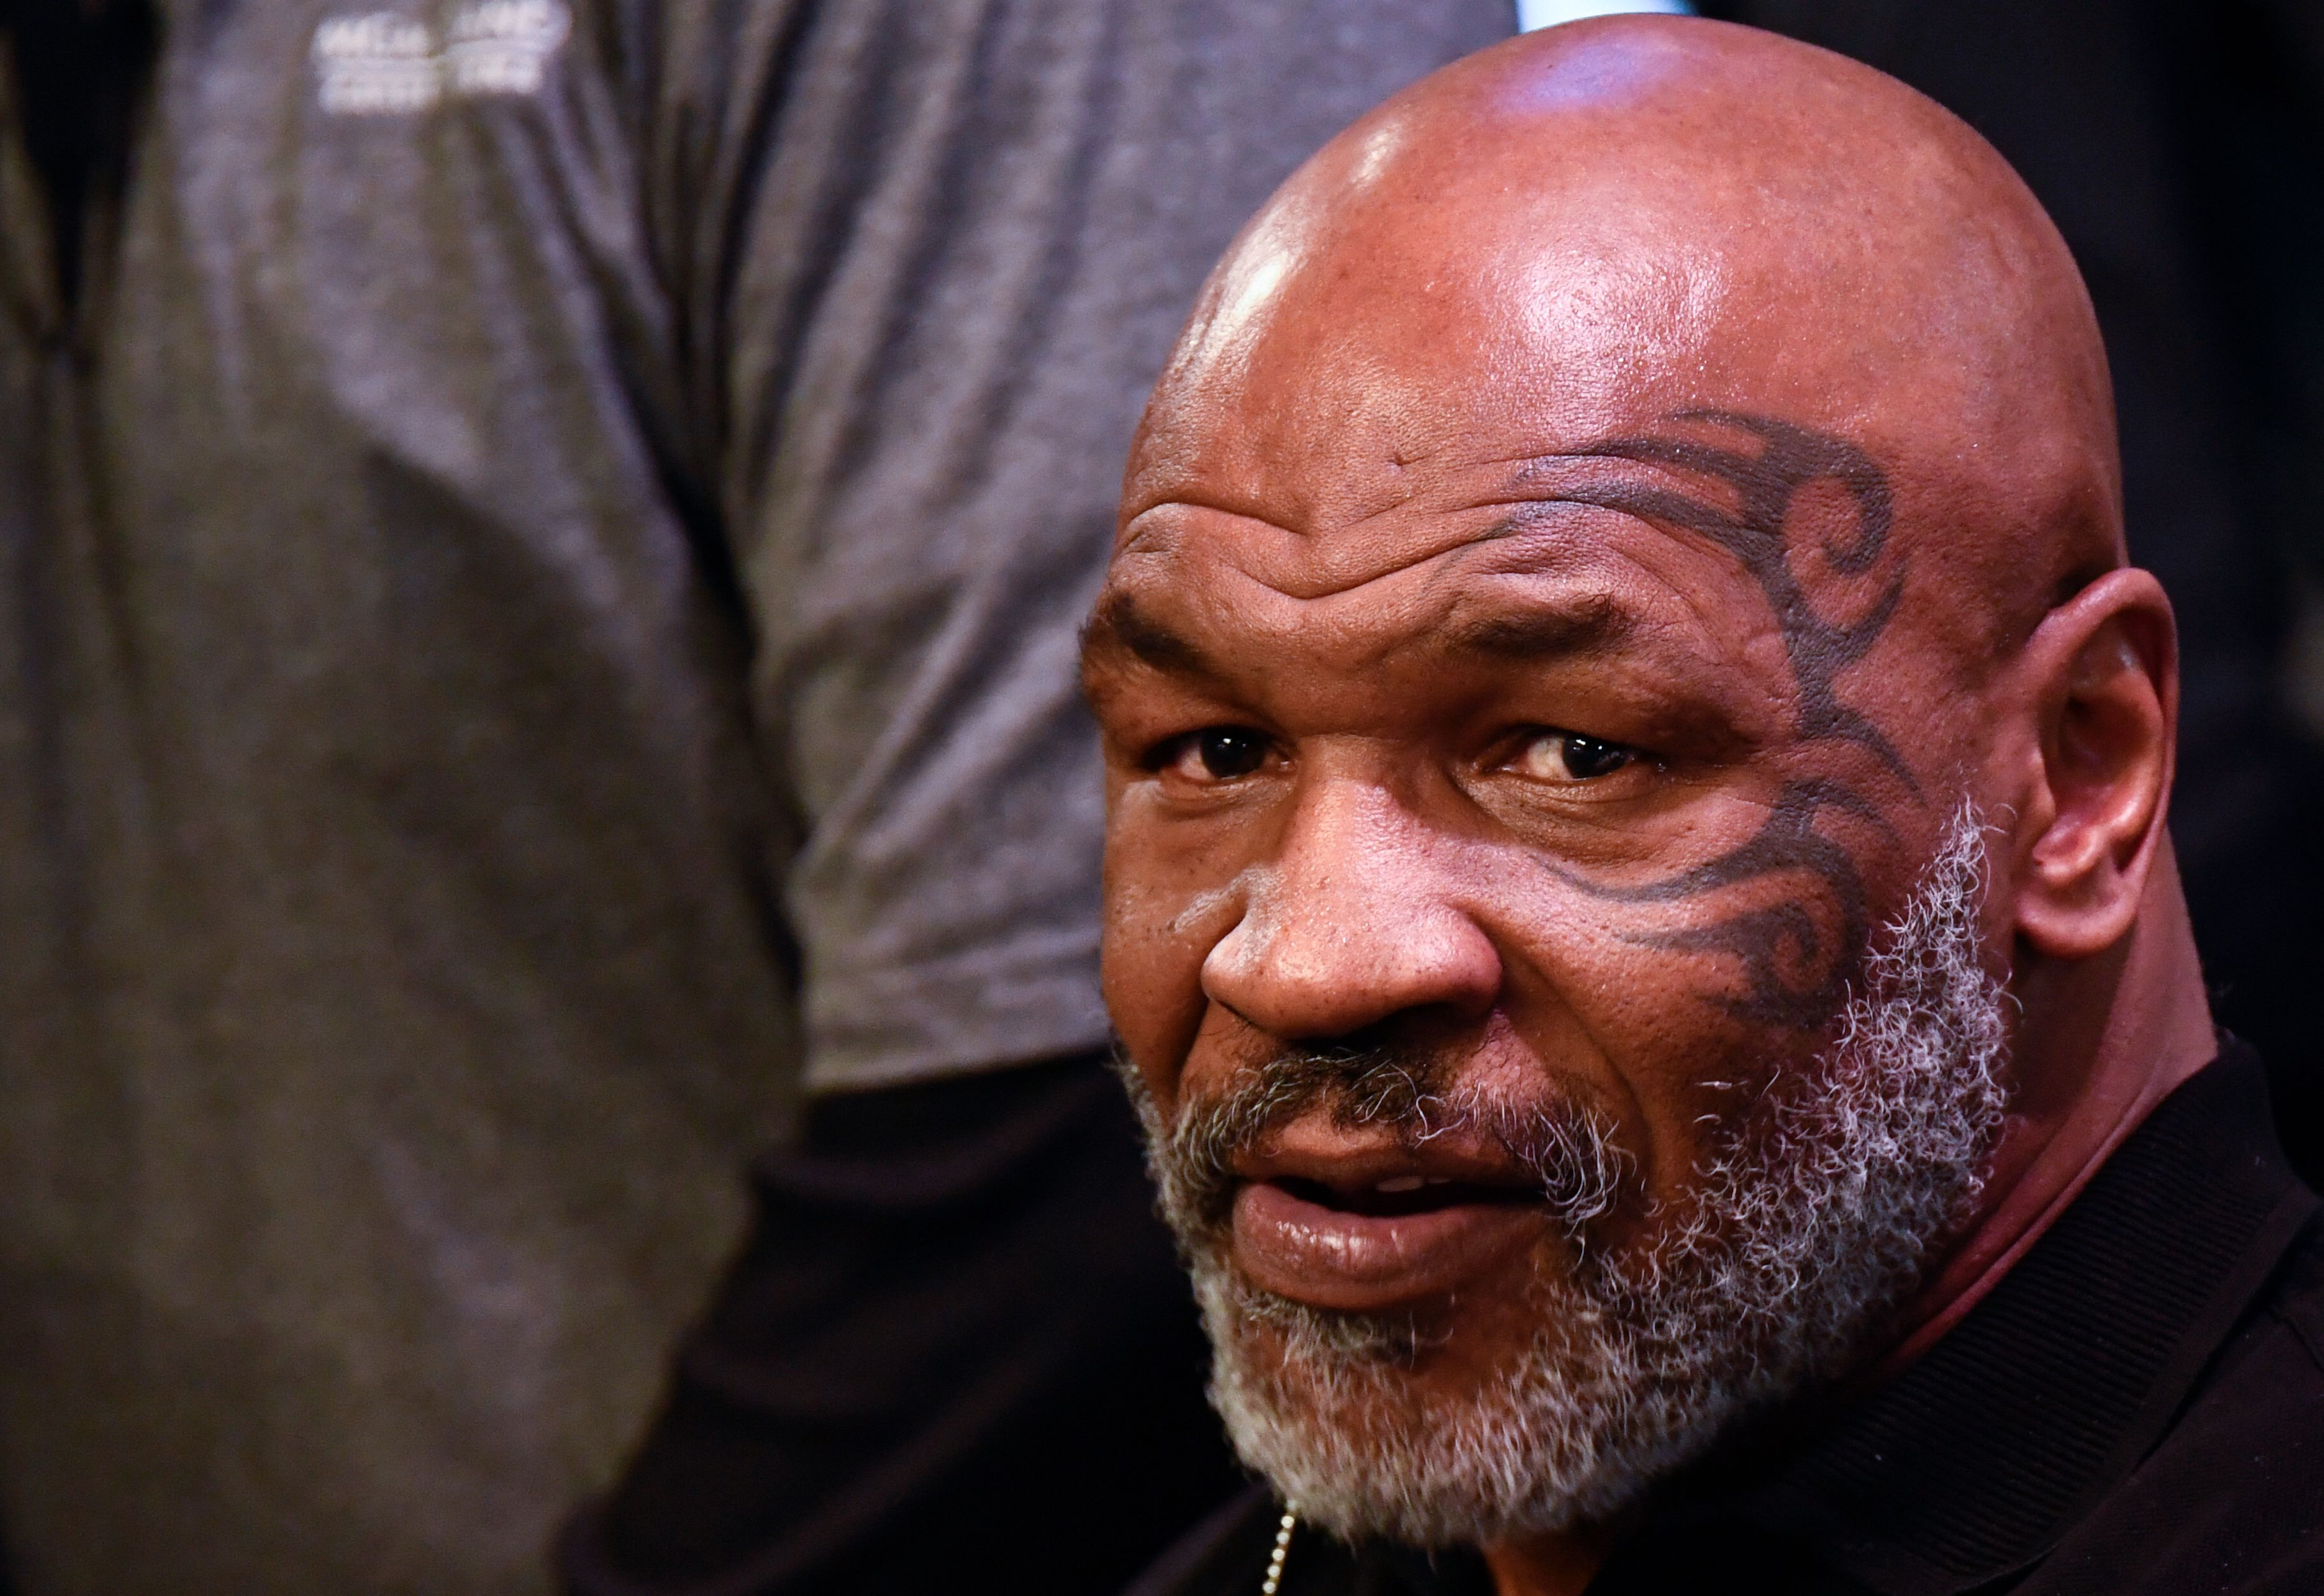 Mike Tyson looks on during the weigh-in for boxers Canelo Alvarez and Caleb Plant.